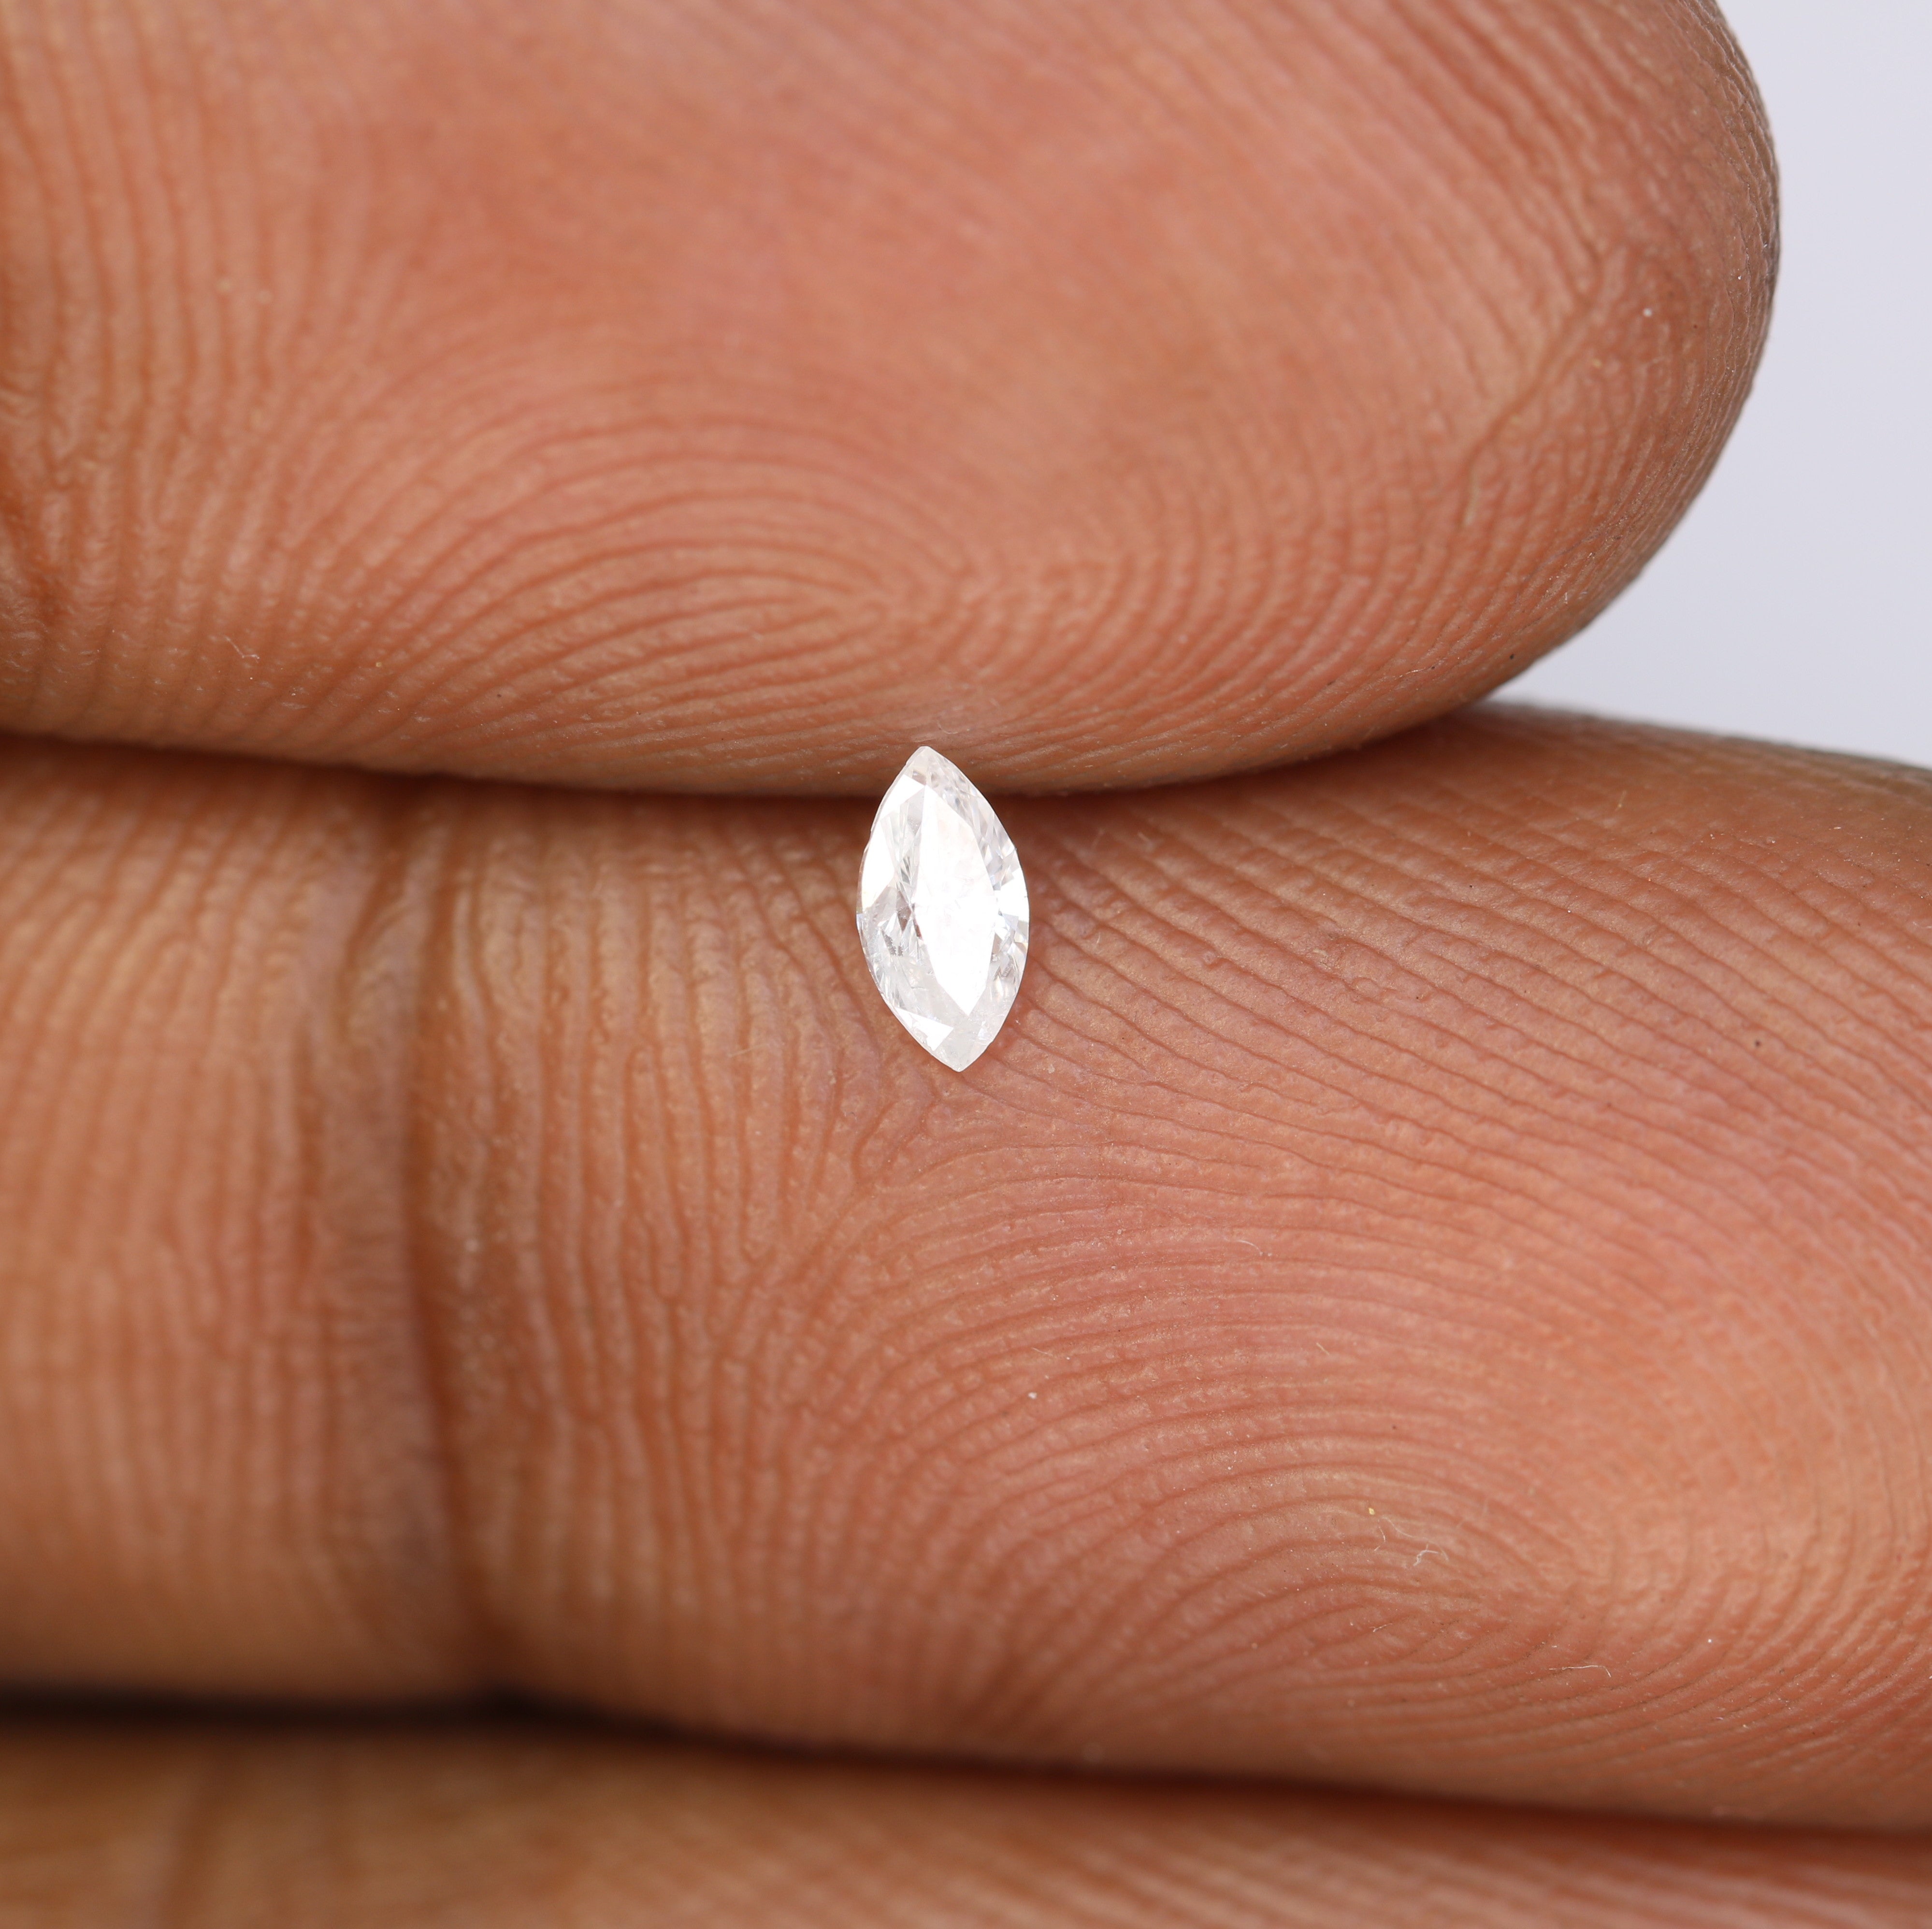 0.14 CT White Marquise Shape Diamond For Engagement Ring